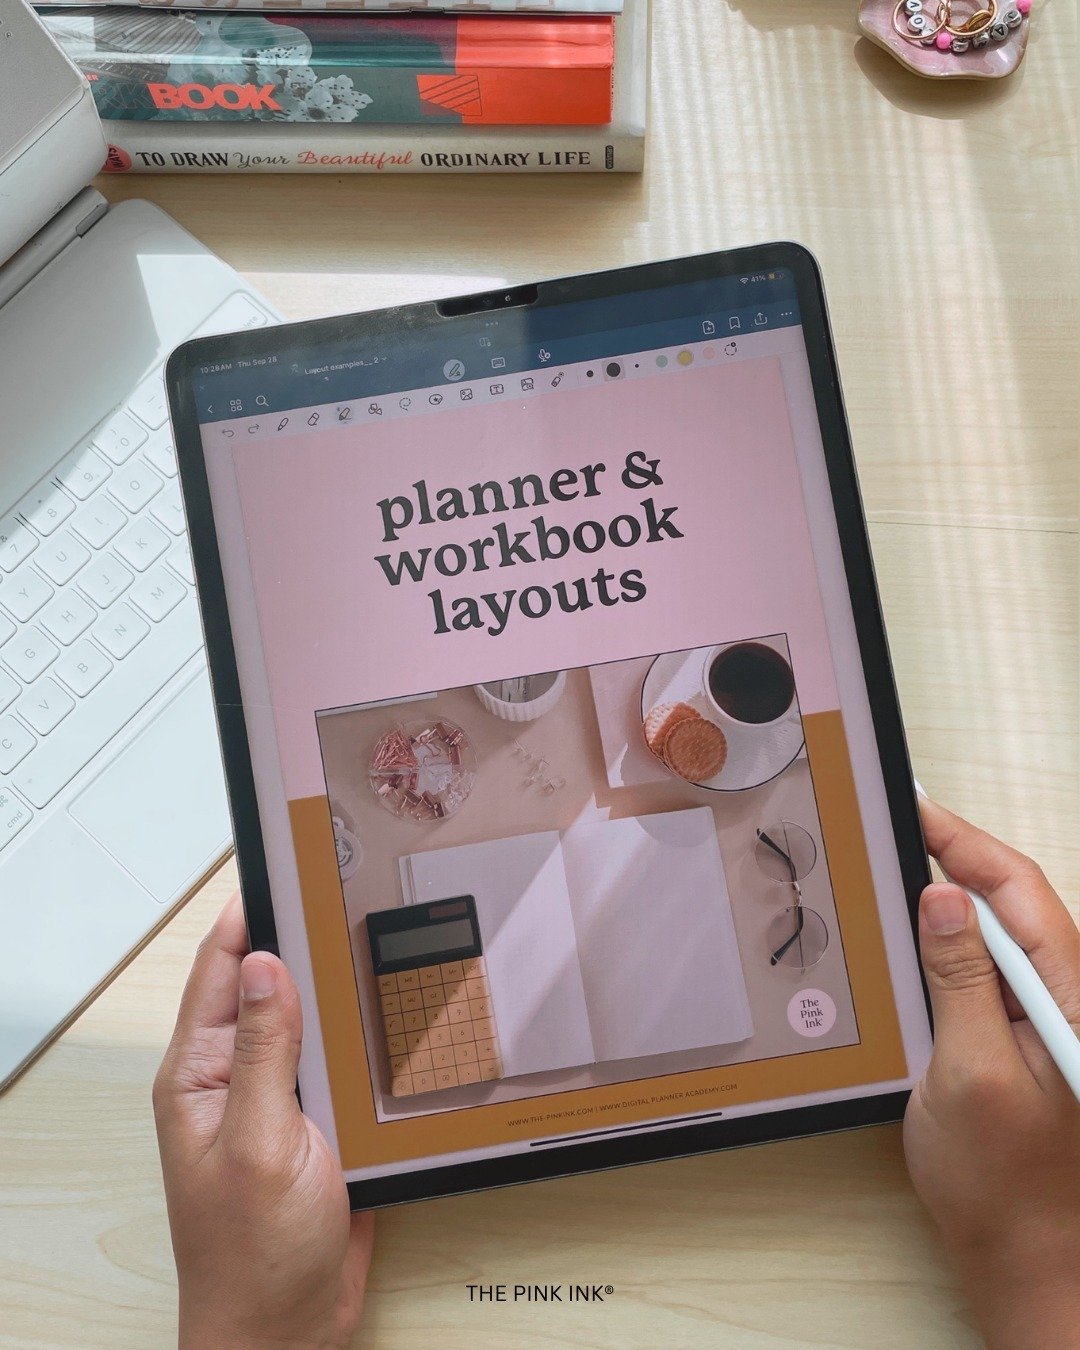 If you've ever felt stuck in the planner design process, this resource is your creative lifeline 🌷⁠
⁠
'Planner and Workbook Layouts' PDF is here to ignite your creativity!⁠
⁠
Let your imagination run wild as you explore endless possibilities for cra